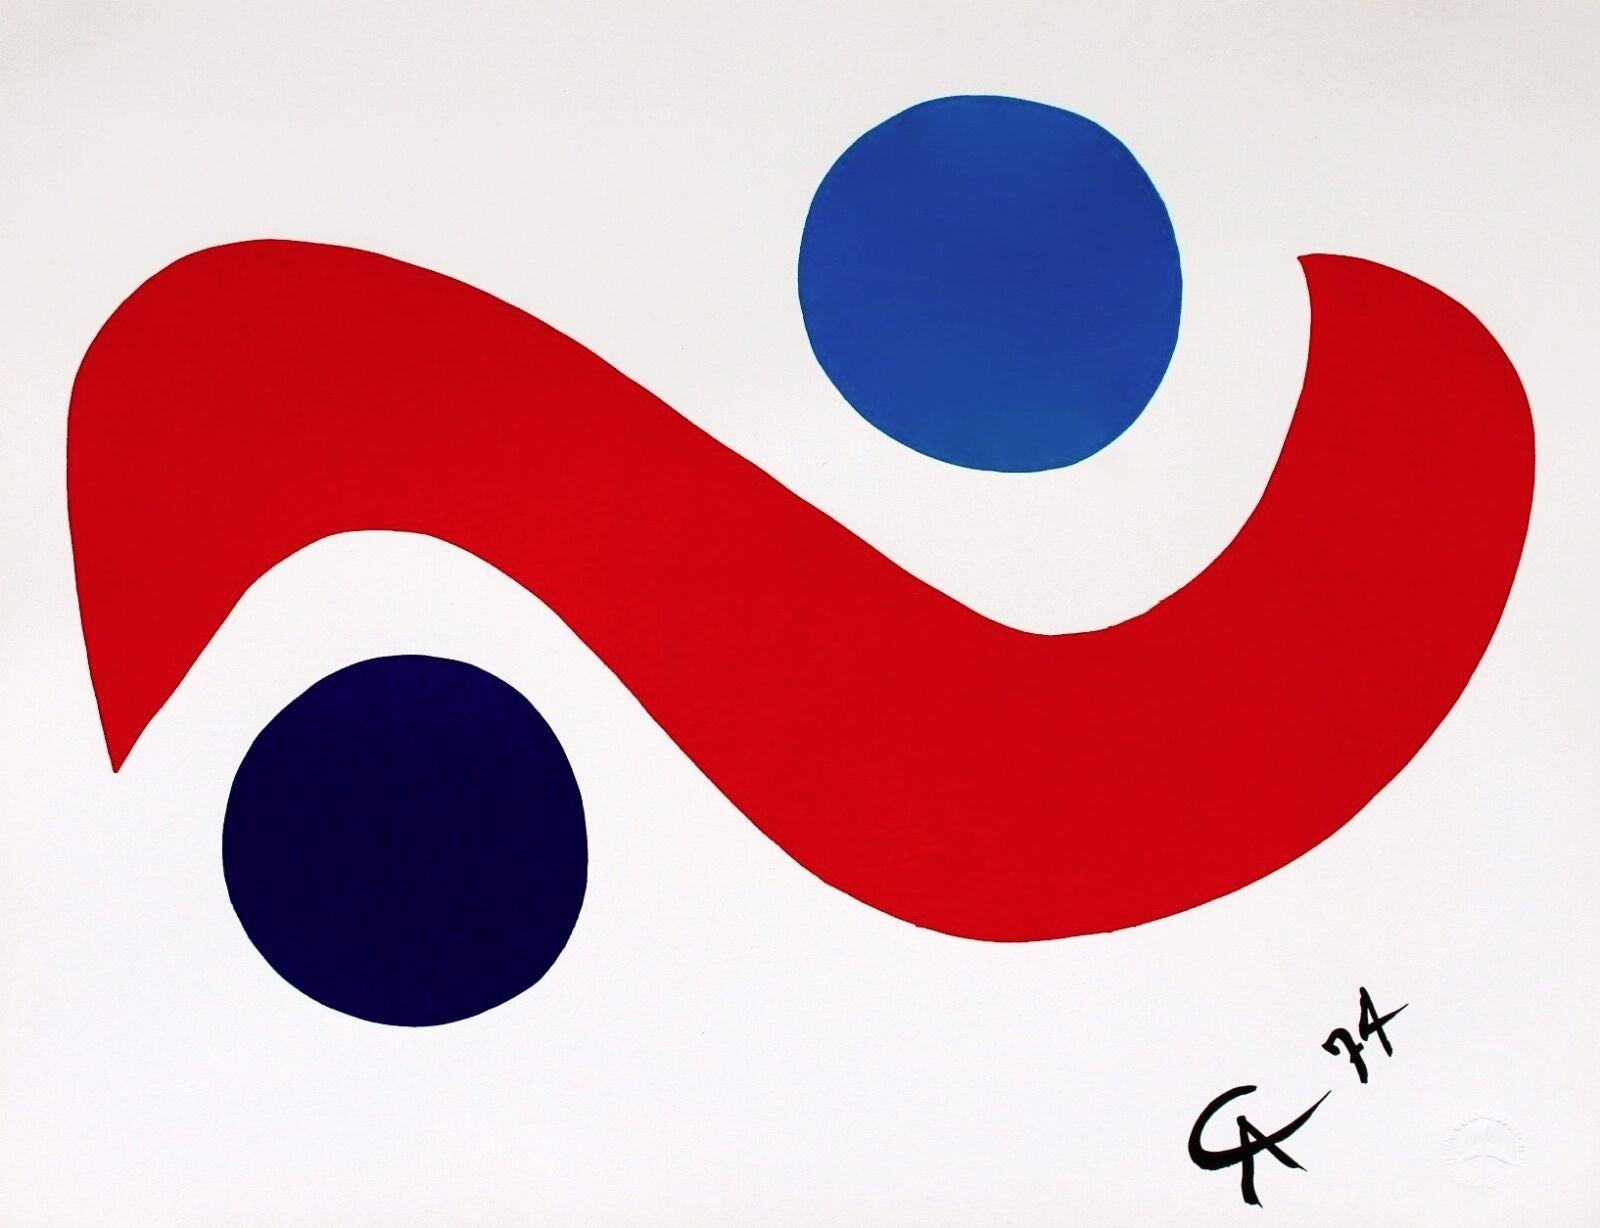 Artist: Alexander Calder (1898-1976)
Title(s): Sky Swirl; Sky Bird; Convection; Beastie; Friendship (from the Braniff International Airways Flying Colors Collection)
Year: 1974
Medium: Lithographs on Arches paper 
Size: 20 x 26 inches, each (five